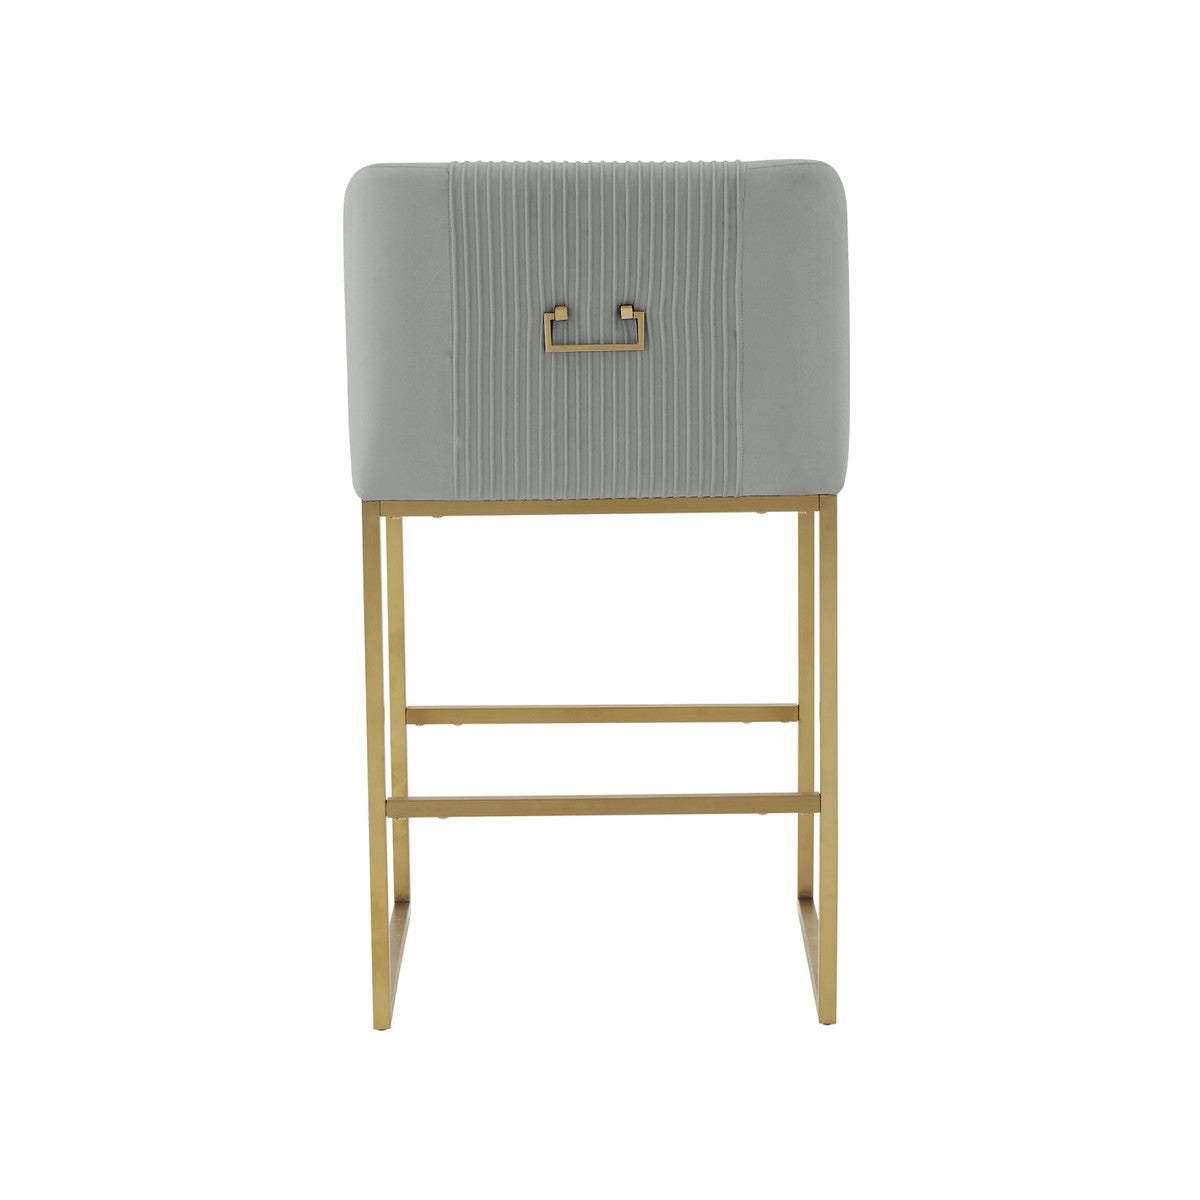 Melodie Grey Pleated Velvet Counter Stool